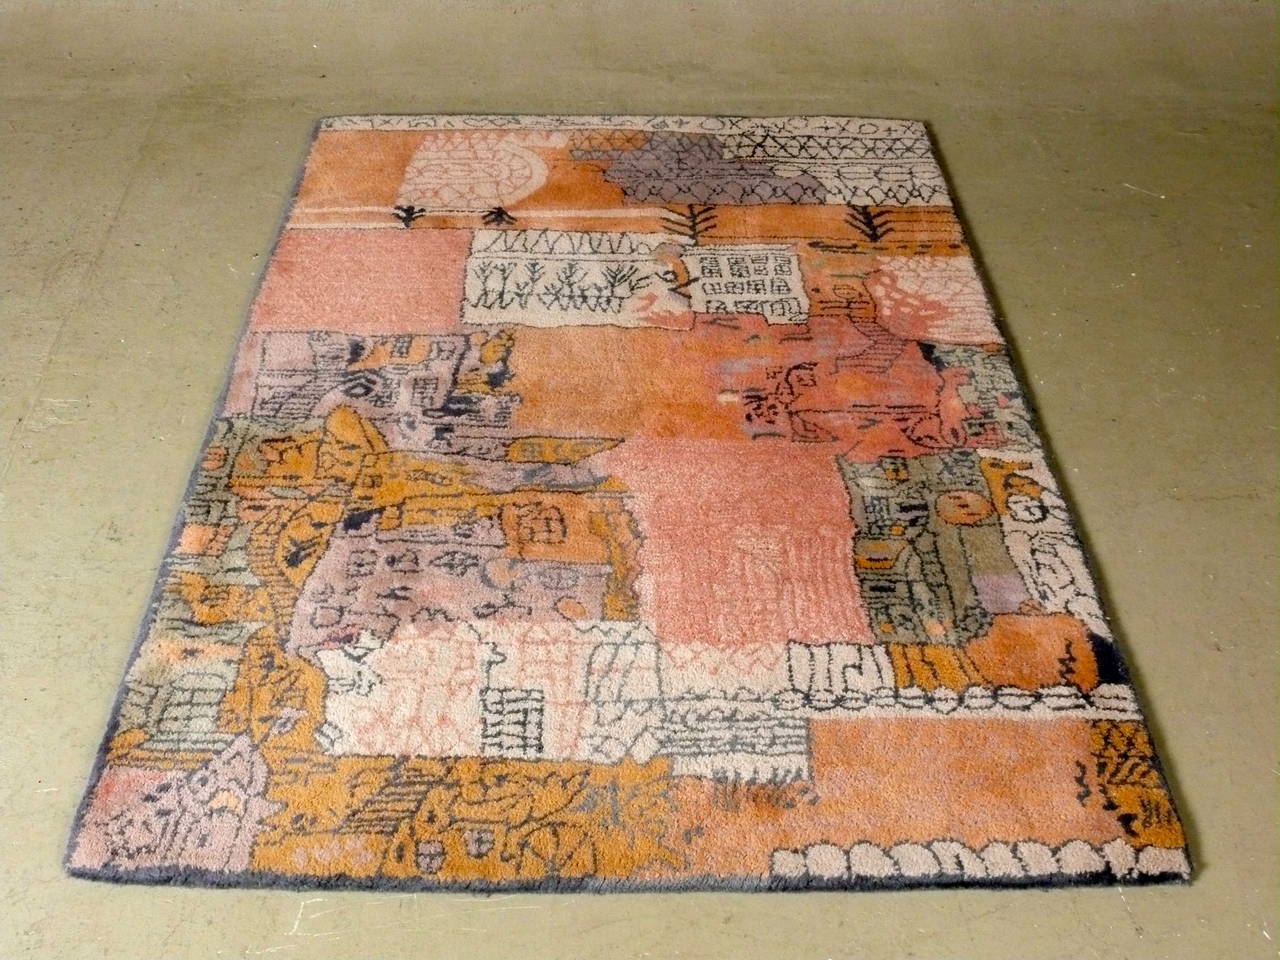 Thick pile, 100% wool rug with beautifully muted (slightly lighter than shown in photos) colors from Ege's Paul Klee collection, made in Denmark, circa 1975.